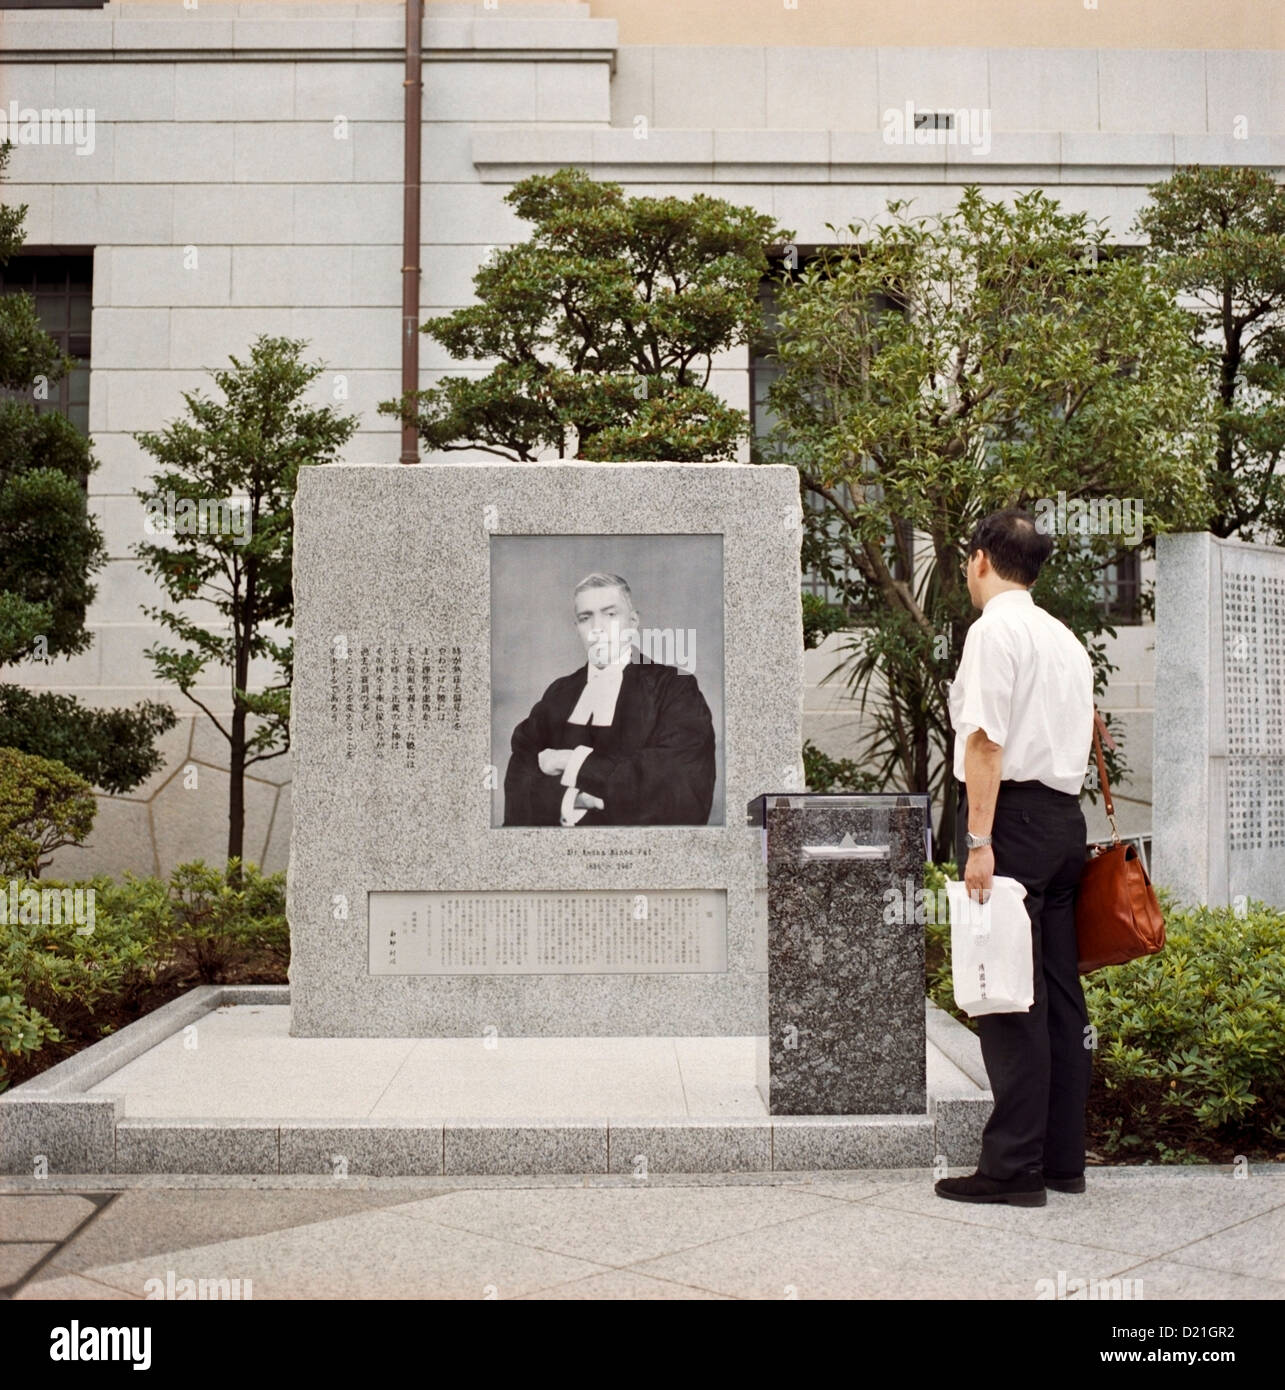 A man looks at a monument to Indian judge Radha Binod Pal at the Yasukuni Shrine in Tokyo, Japan Stock Photo